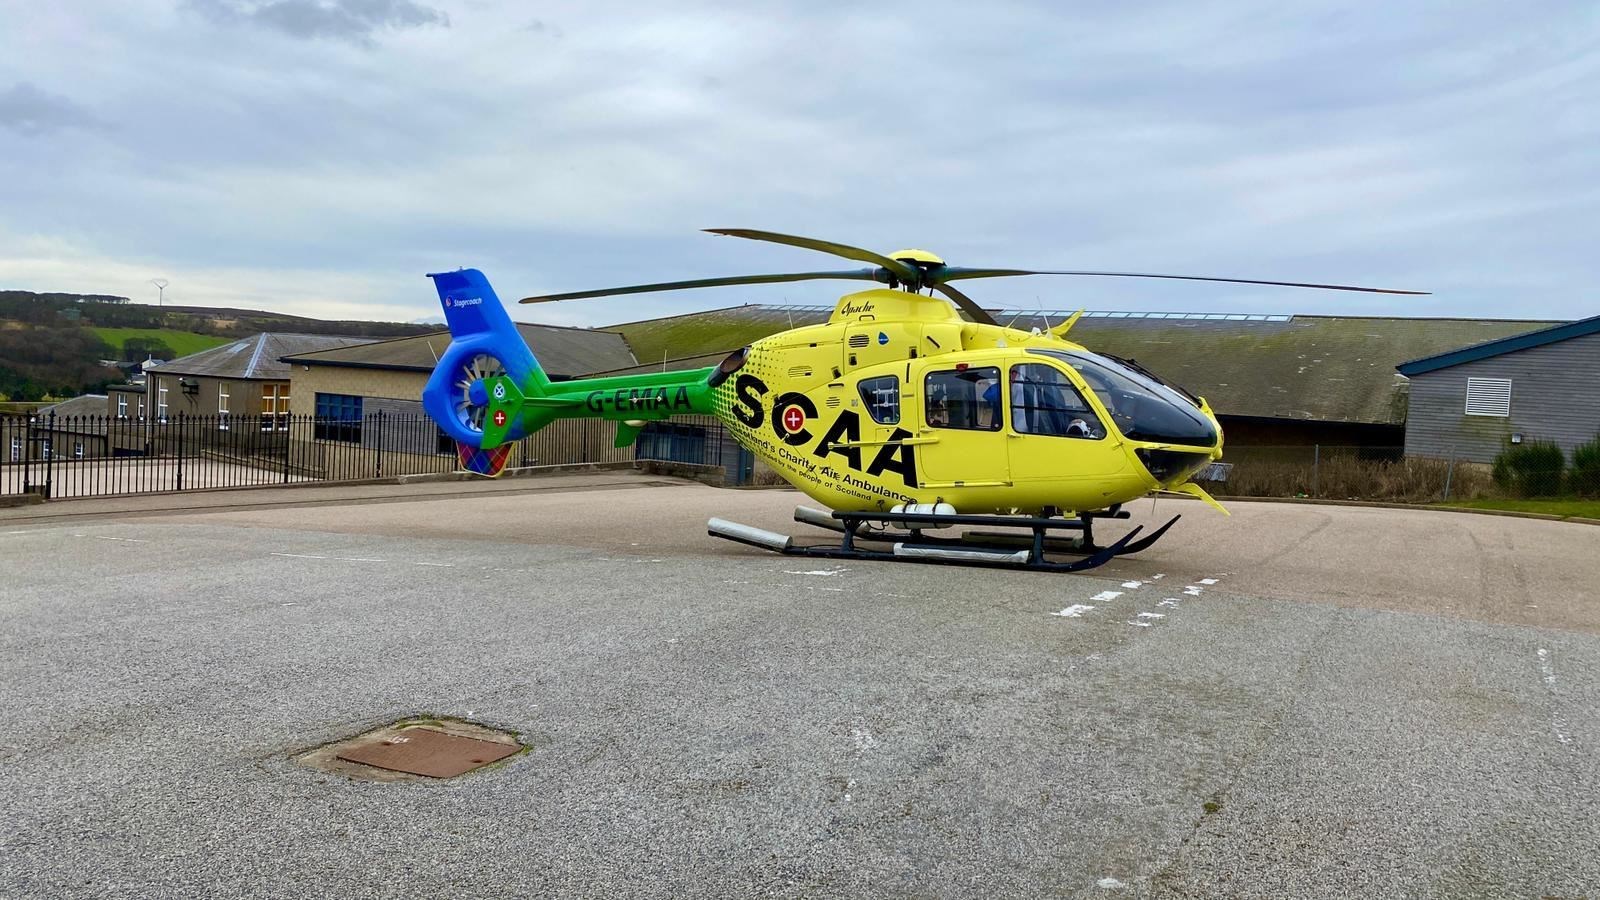 The Scottish Charity Air Ambulance's Helimed 79 landed within the grounds of Banff Primary School around midday on Thursday.